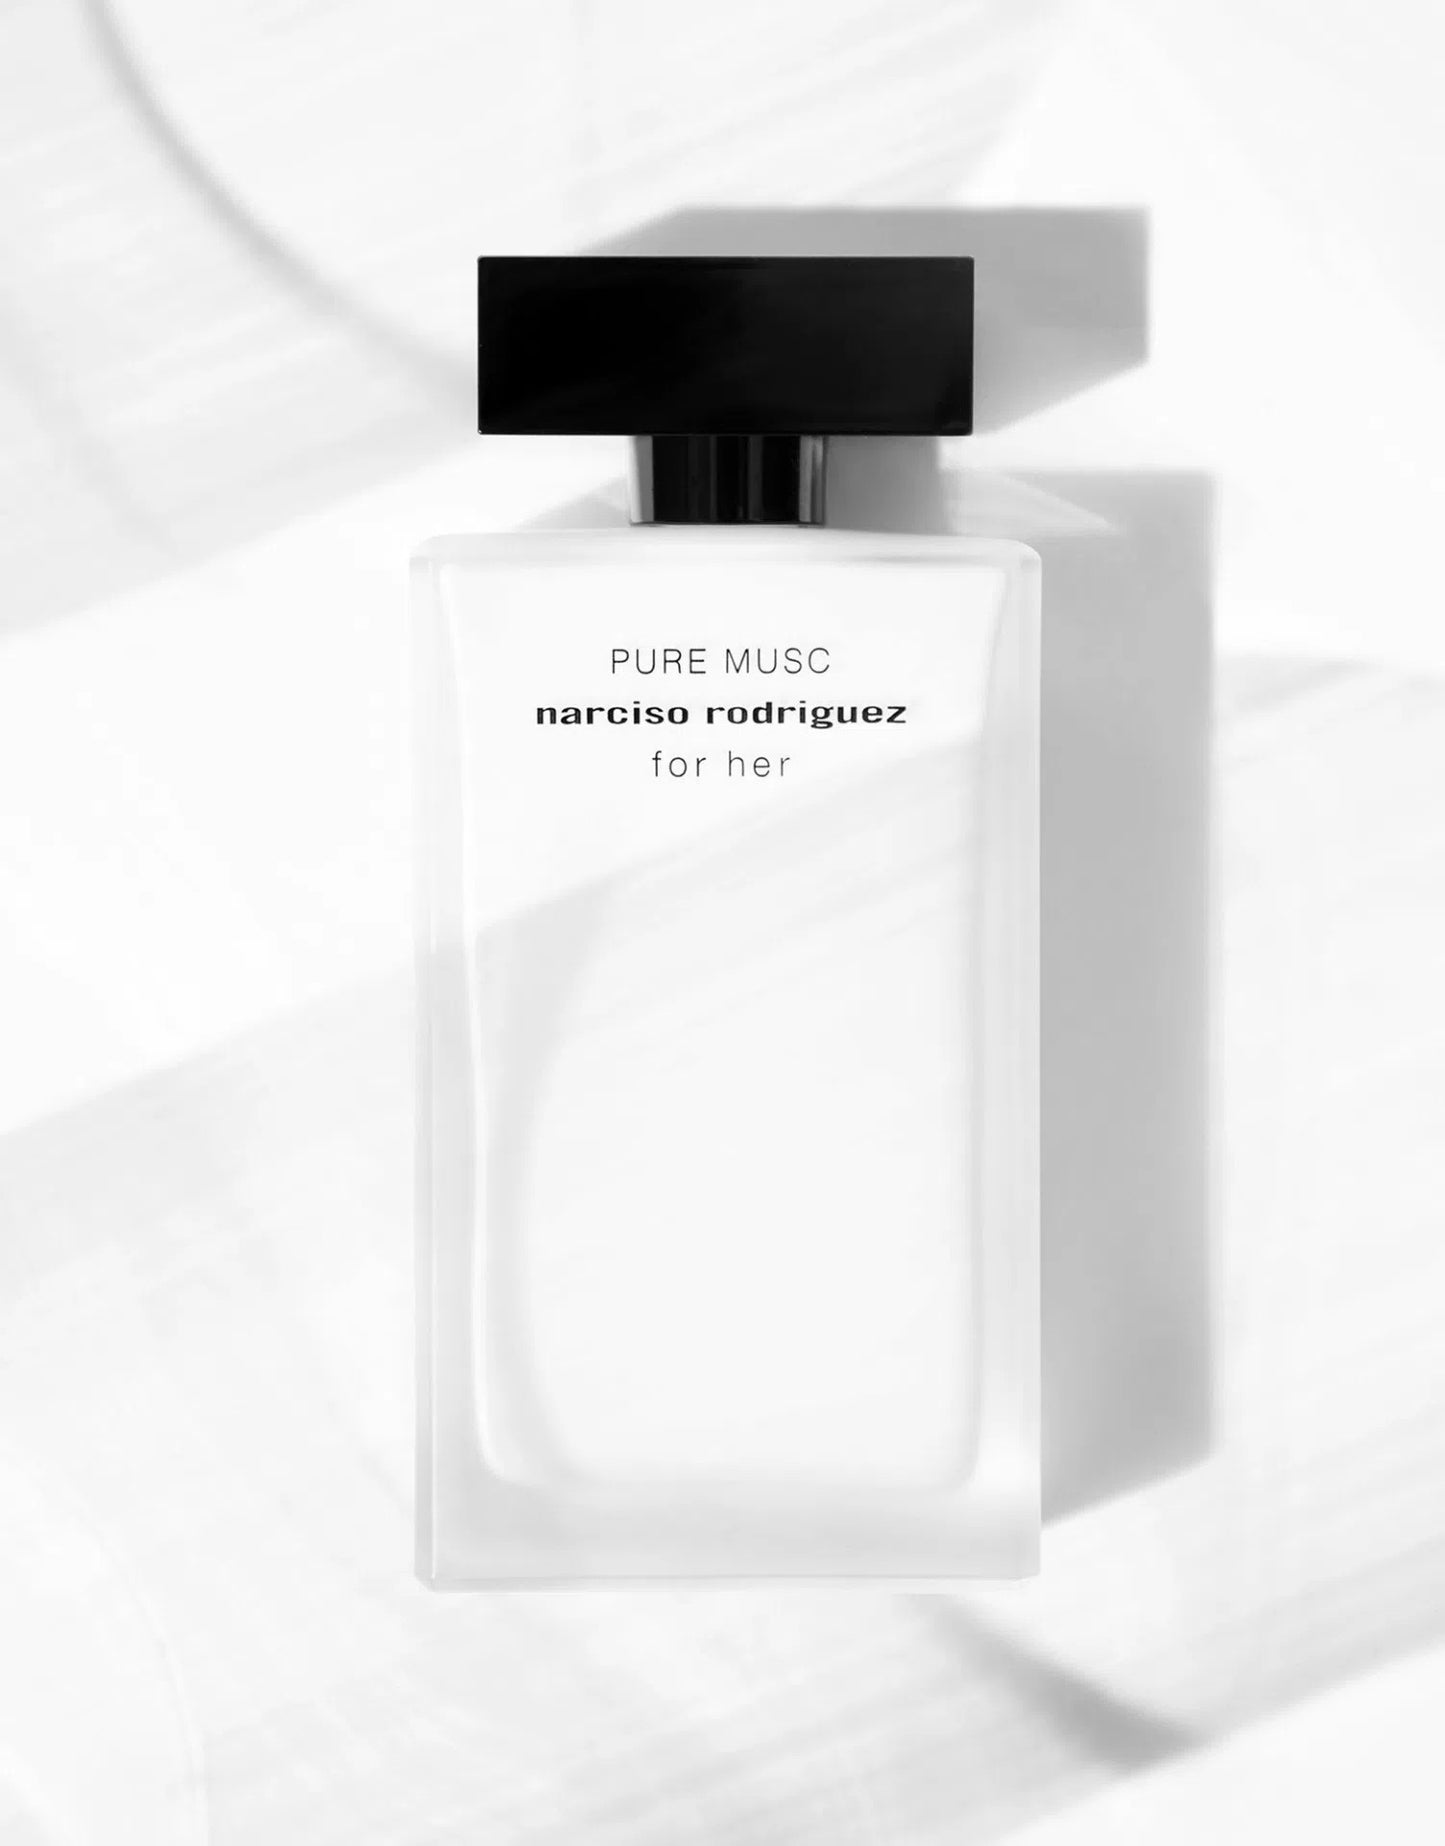 Tester Perfume EDP Narciso Rodriguez
Pure Musc